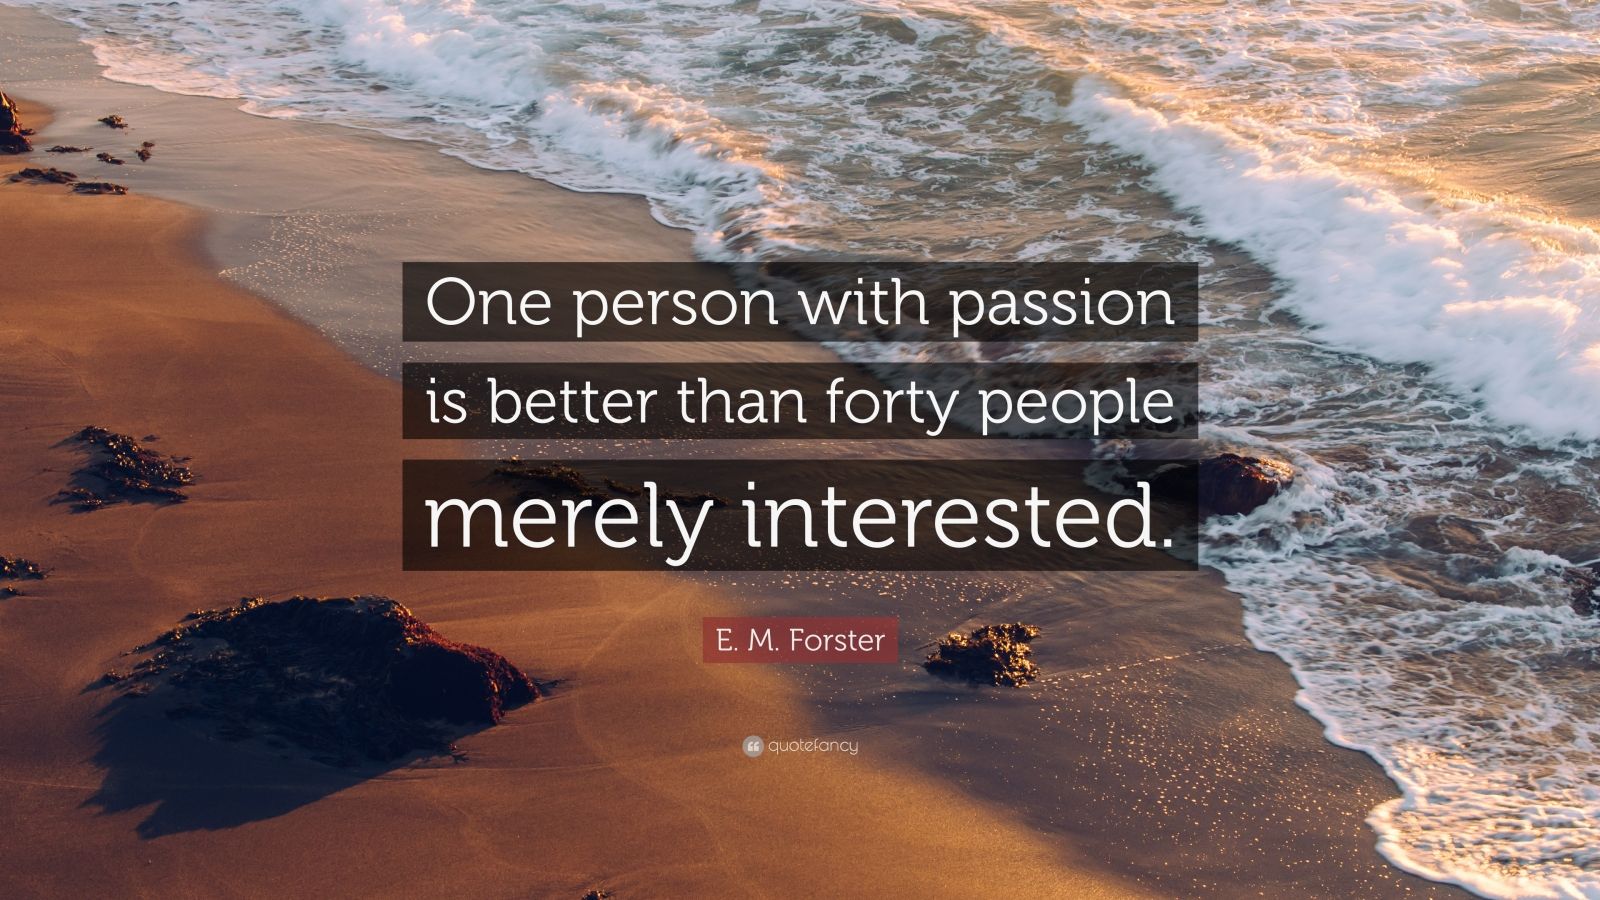 E M Forster Quote “one Person With Passion Is Better Than Forty People Merely Interested